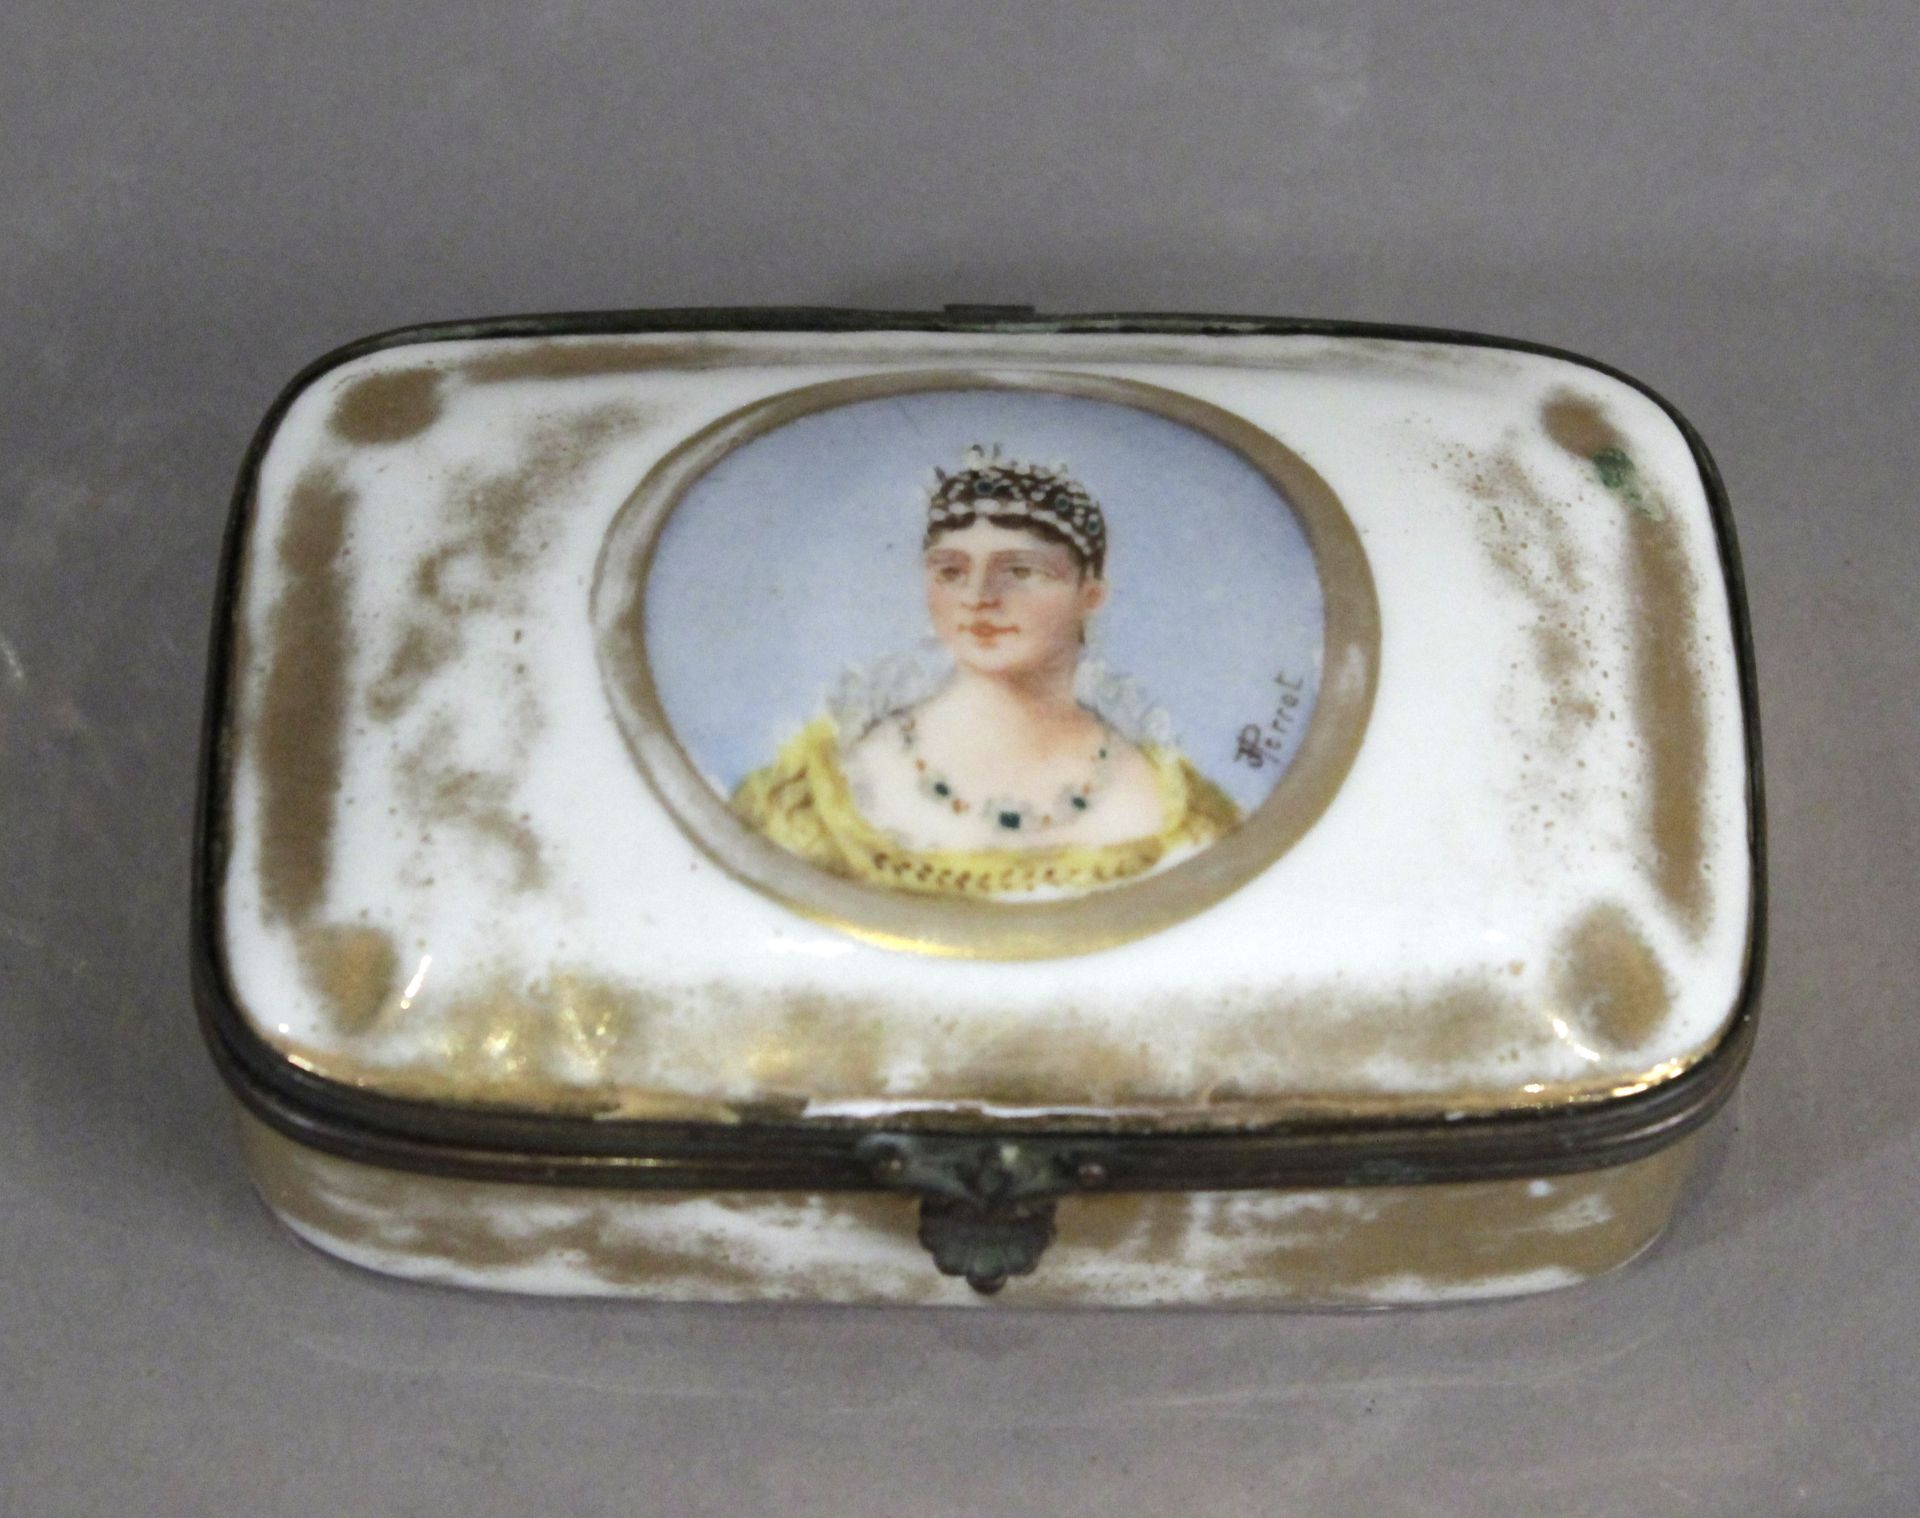 A 19th century French box in Old Paris porcelain - Image 2 of 4